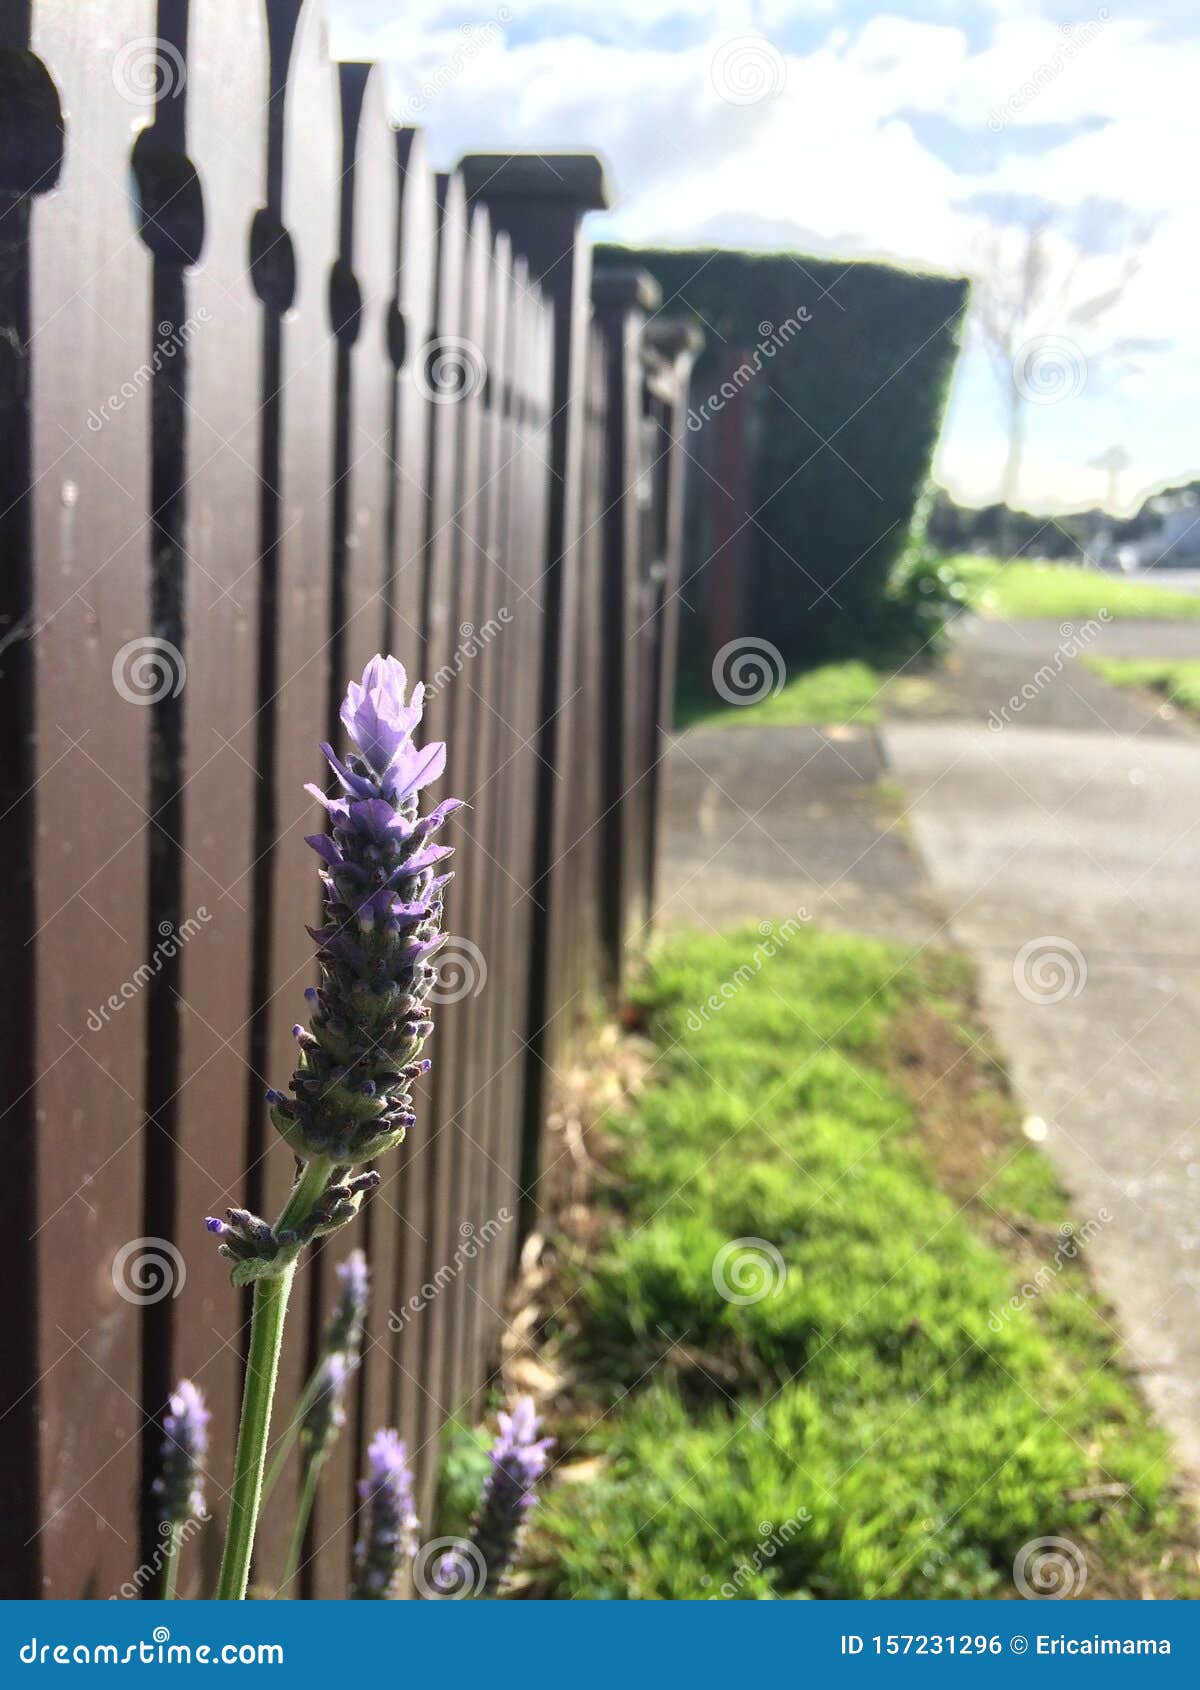 a lavender outside of the woode fance